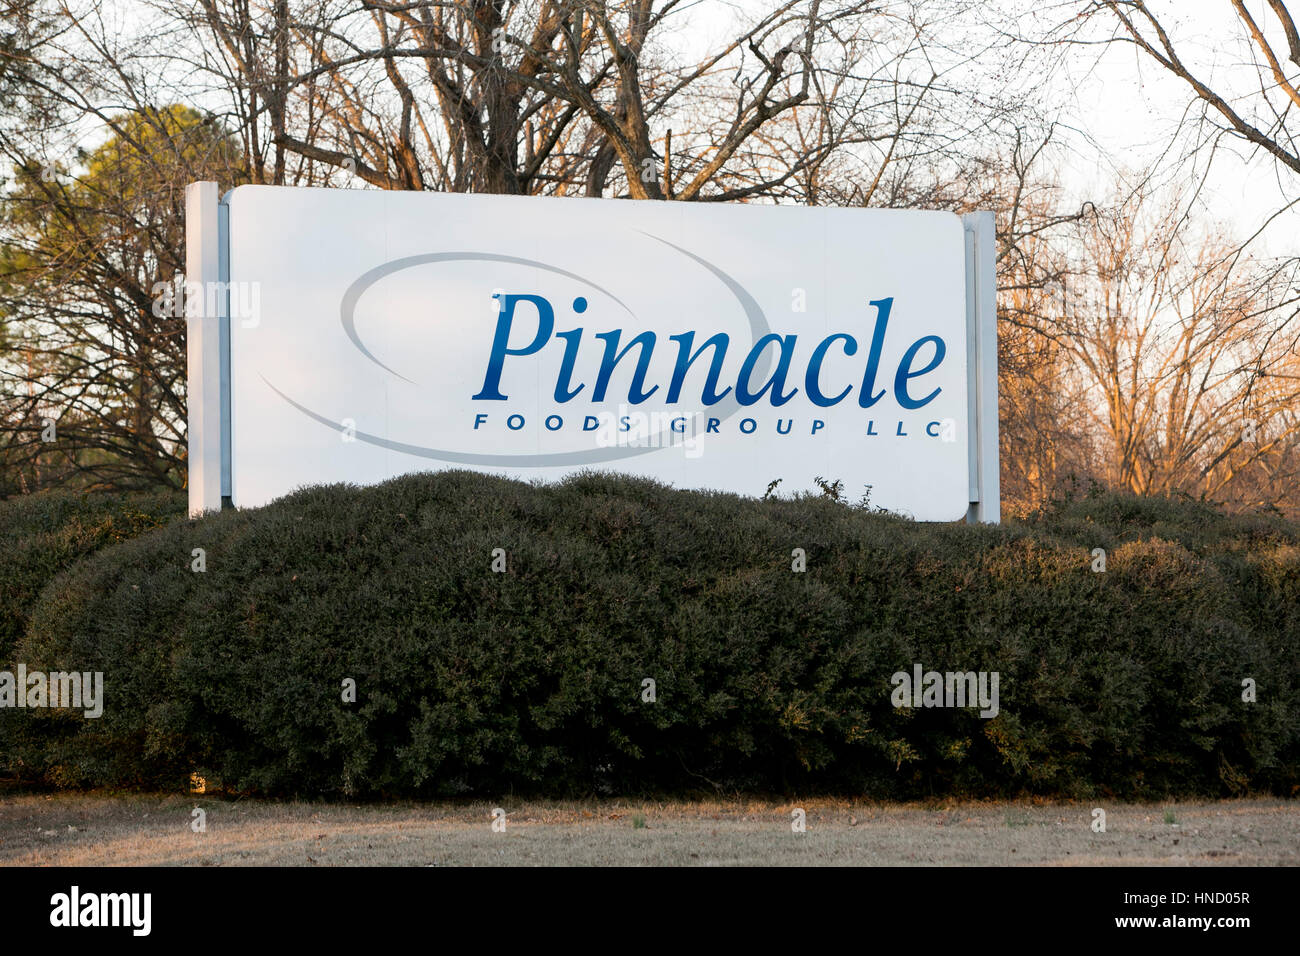 A logo sign outside of a facility occupied by the Pinnacle Foods Group in Jackson, Tennessee on February 5, 2017. Stock Photo